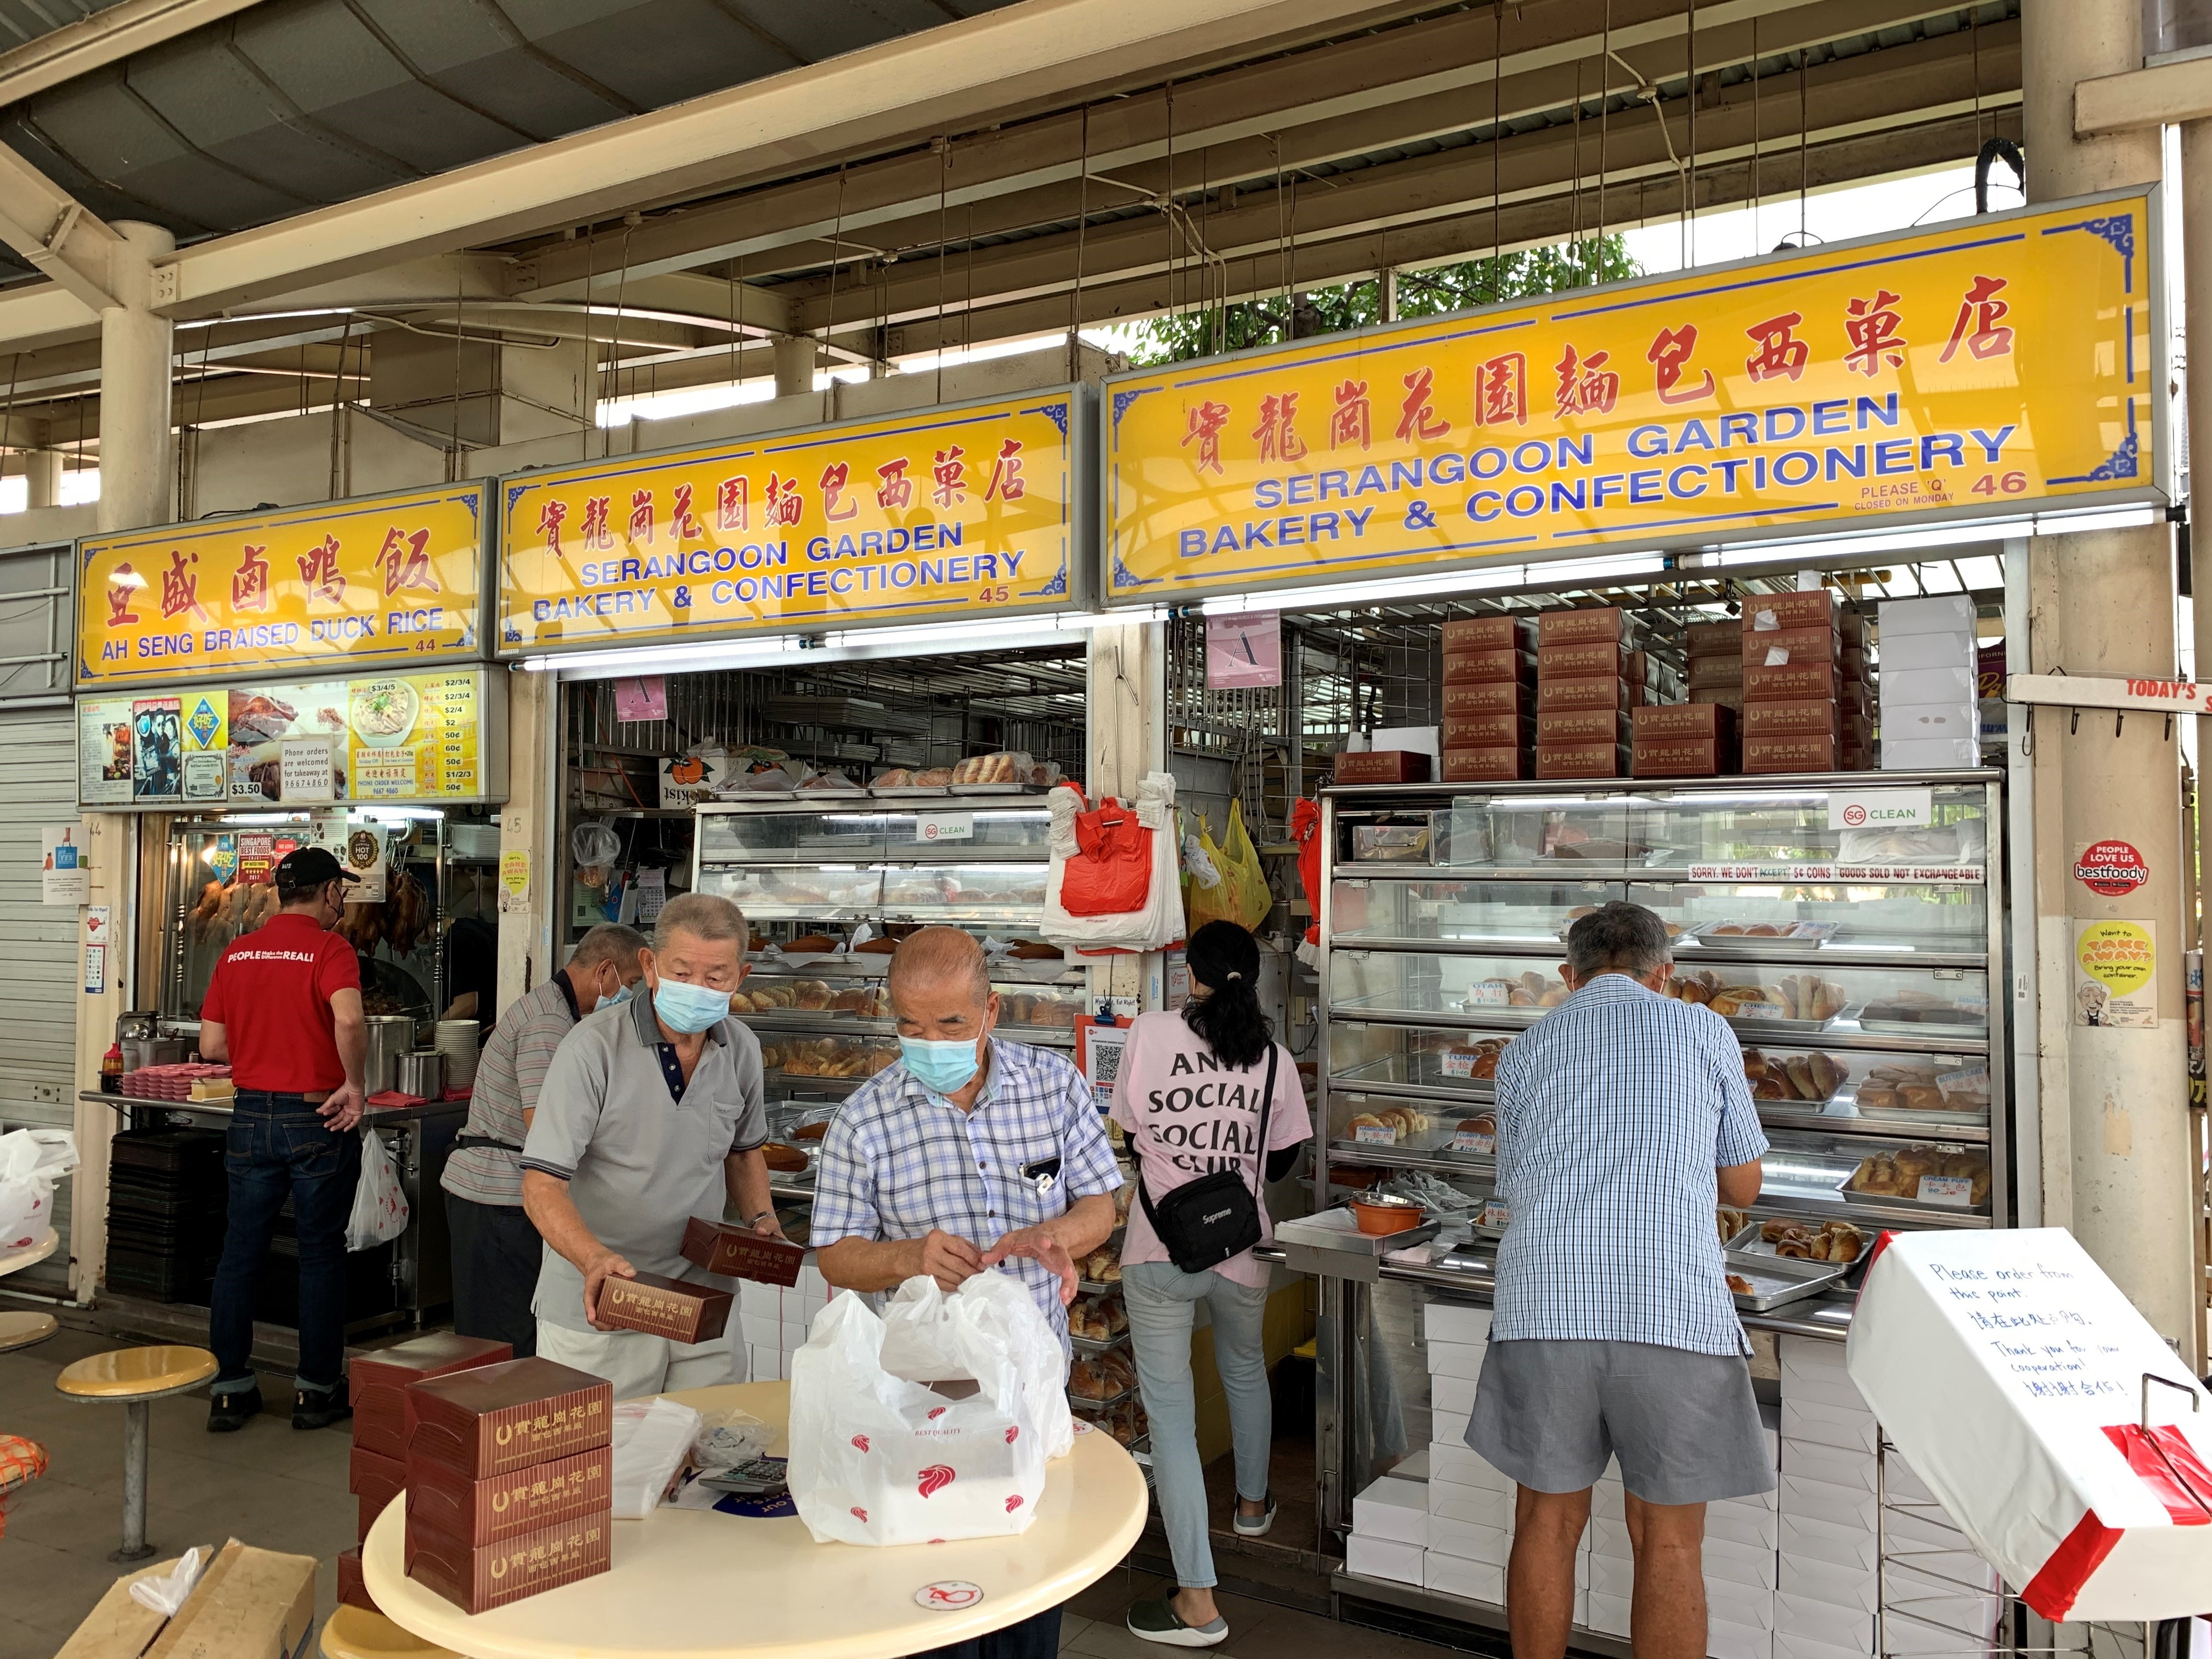 long queues at serangoon garden bakery and confectionery in singapore